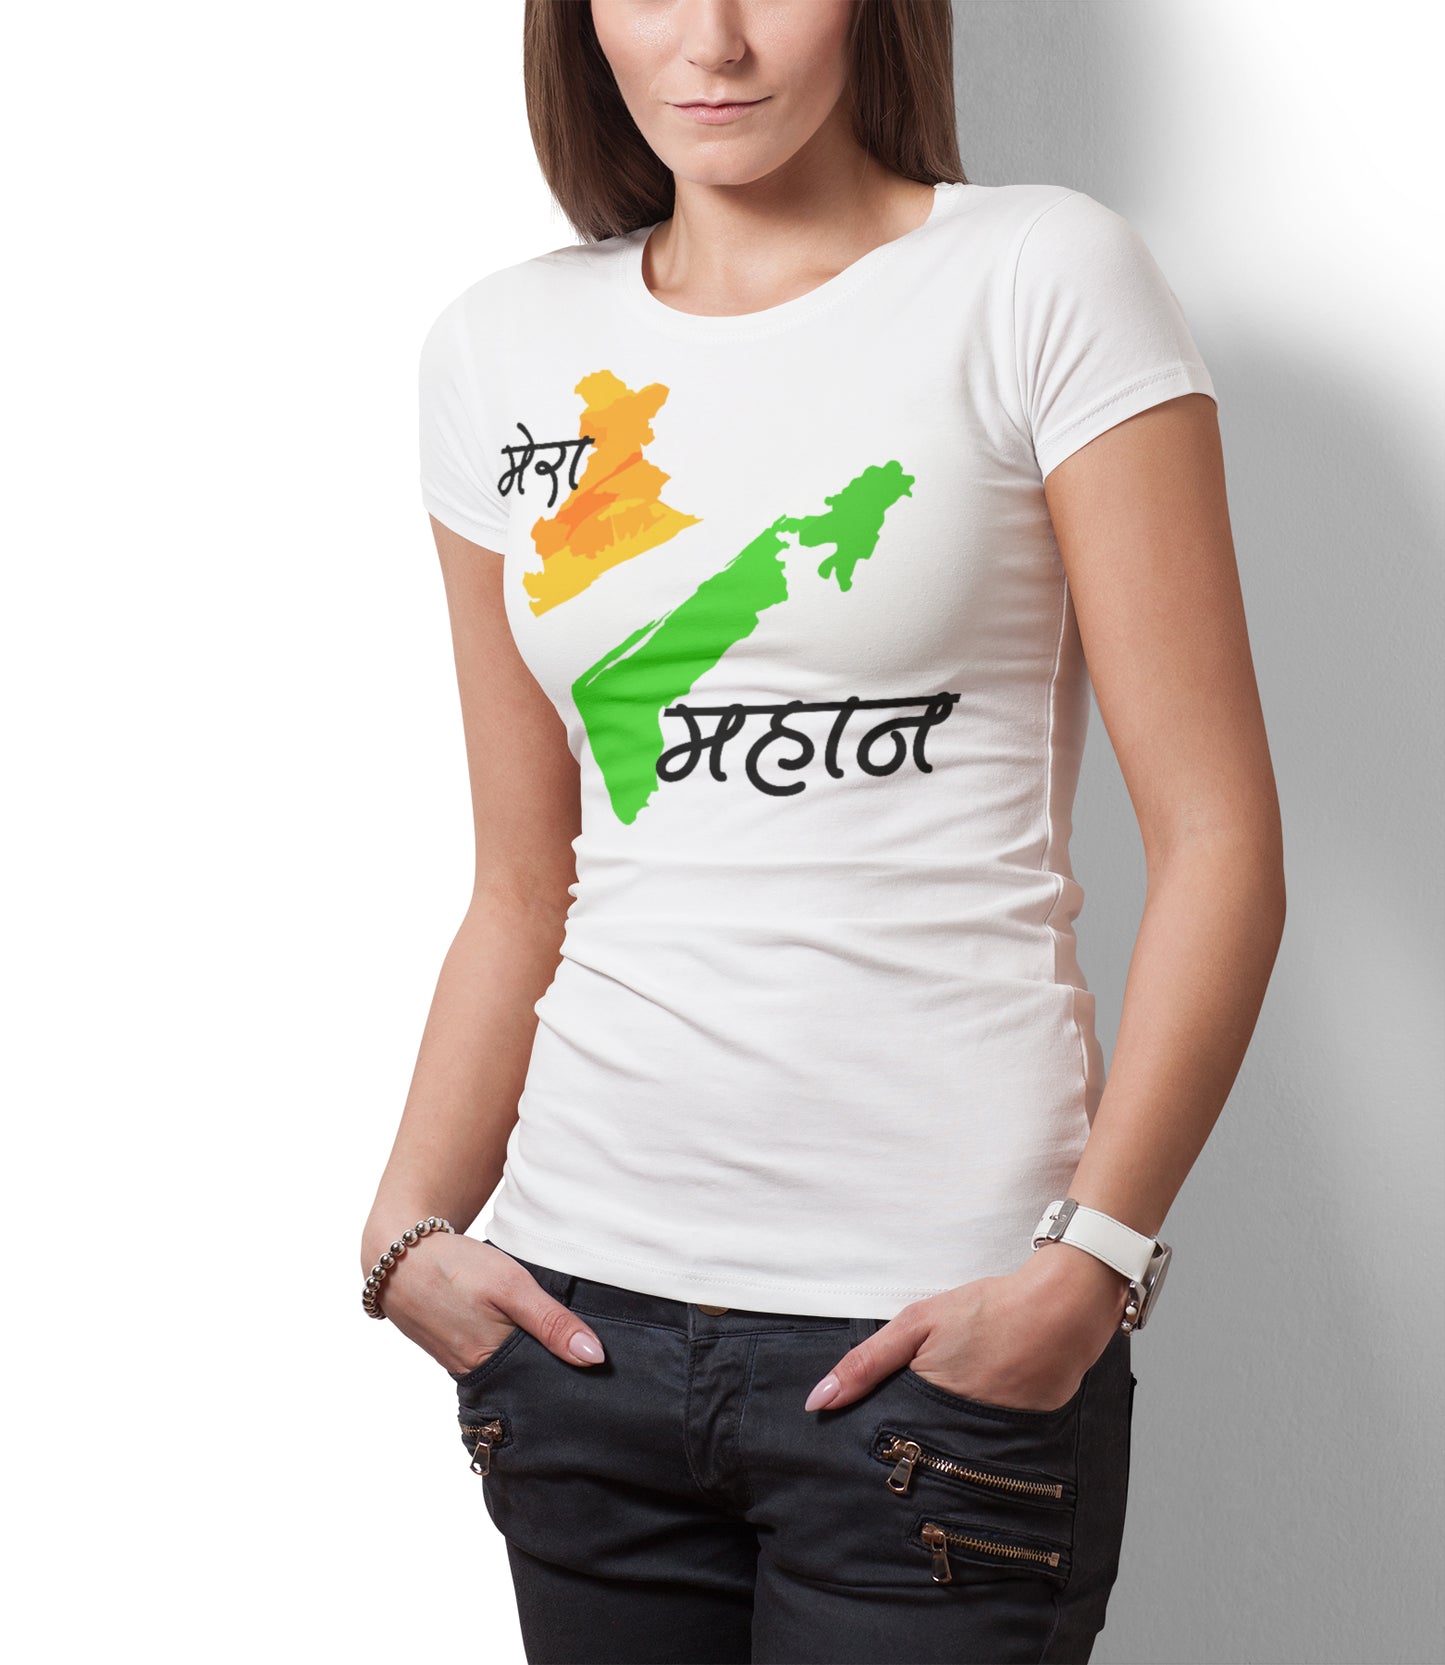 iberry's Independence day t shirt | Republic day t shirts |India t shirts |Patriotic tshirt |15 August t shirts |Round neck cotton tshirts -10